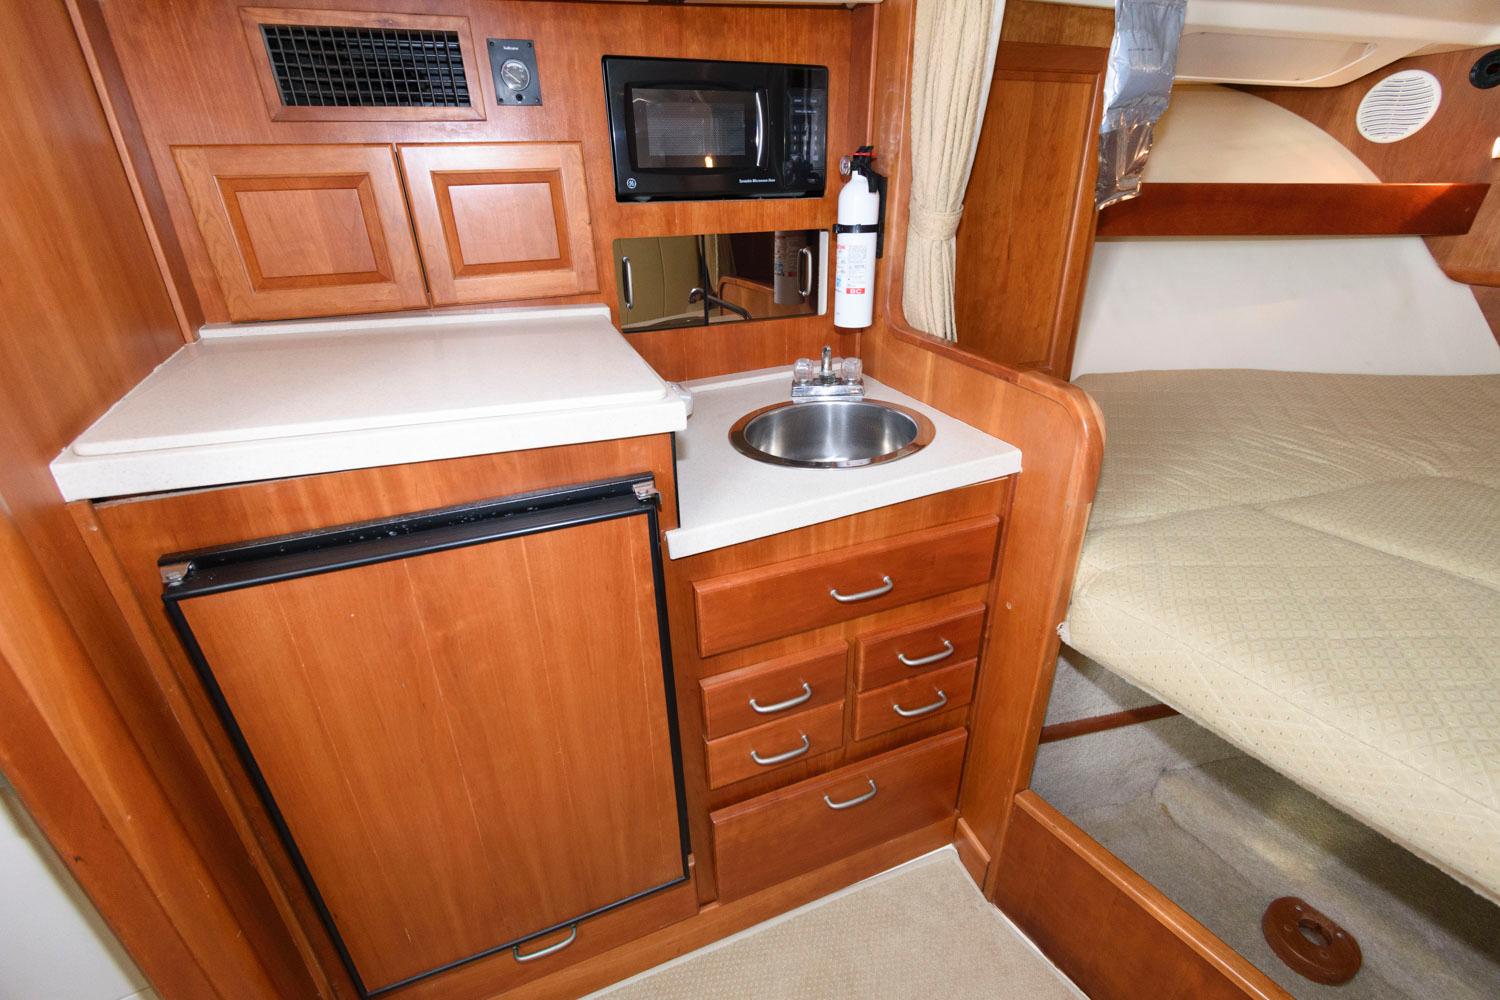 M 7421 MD Knot 10 Yacht Sales